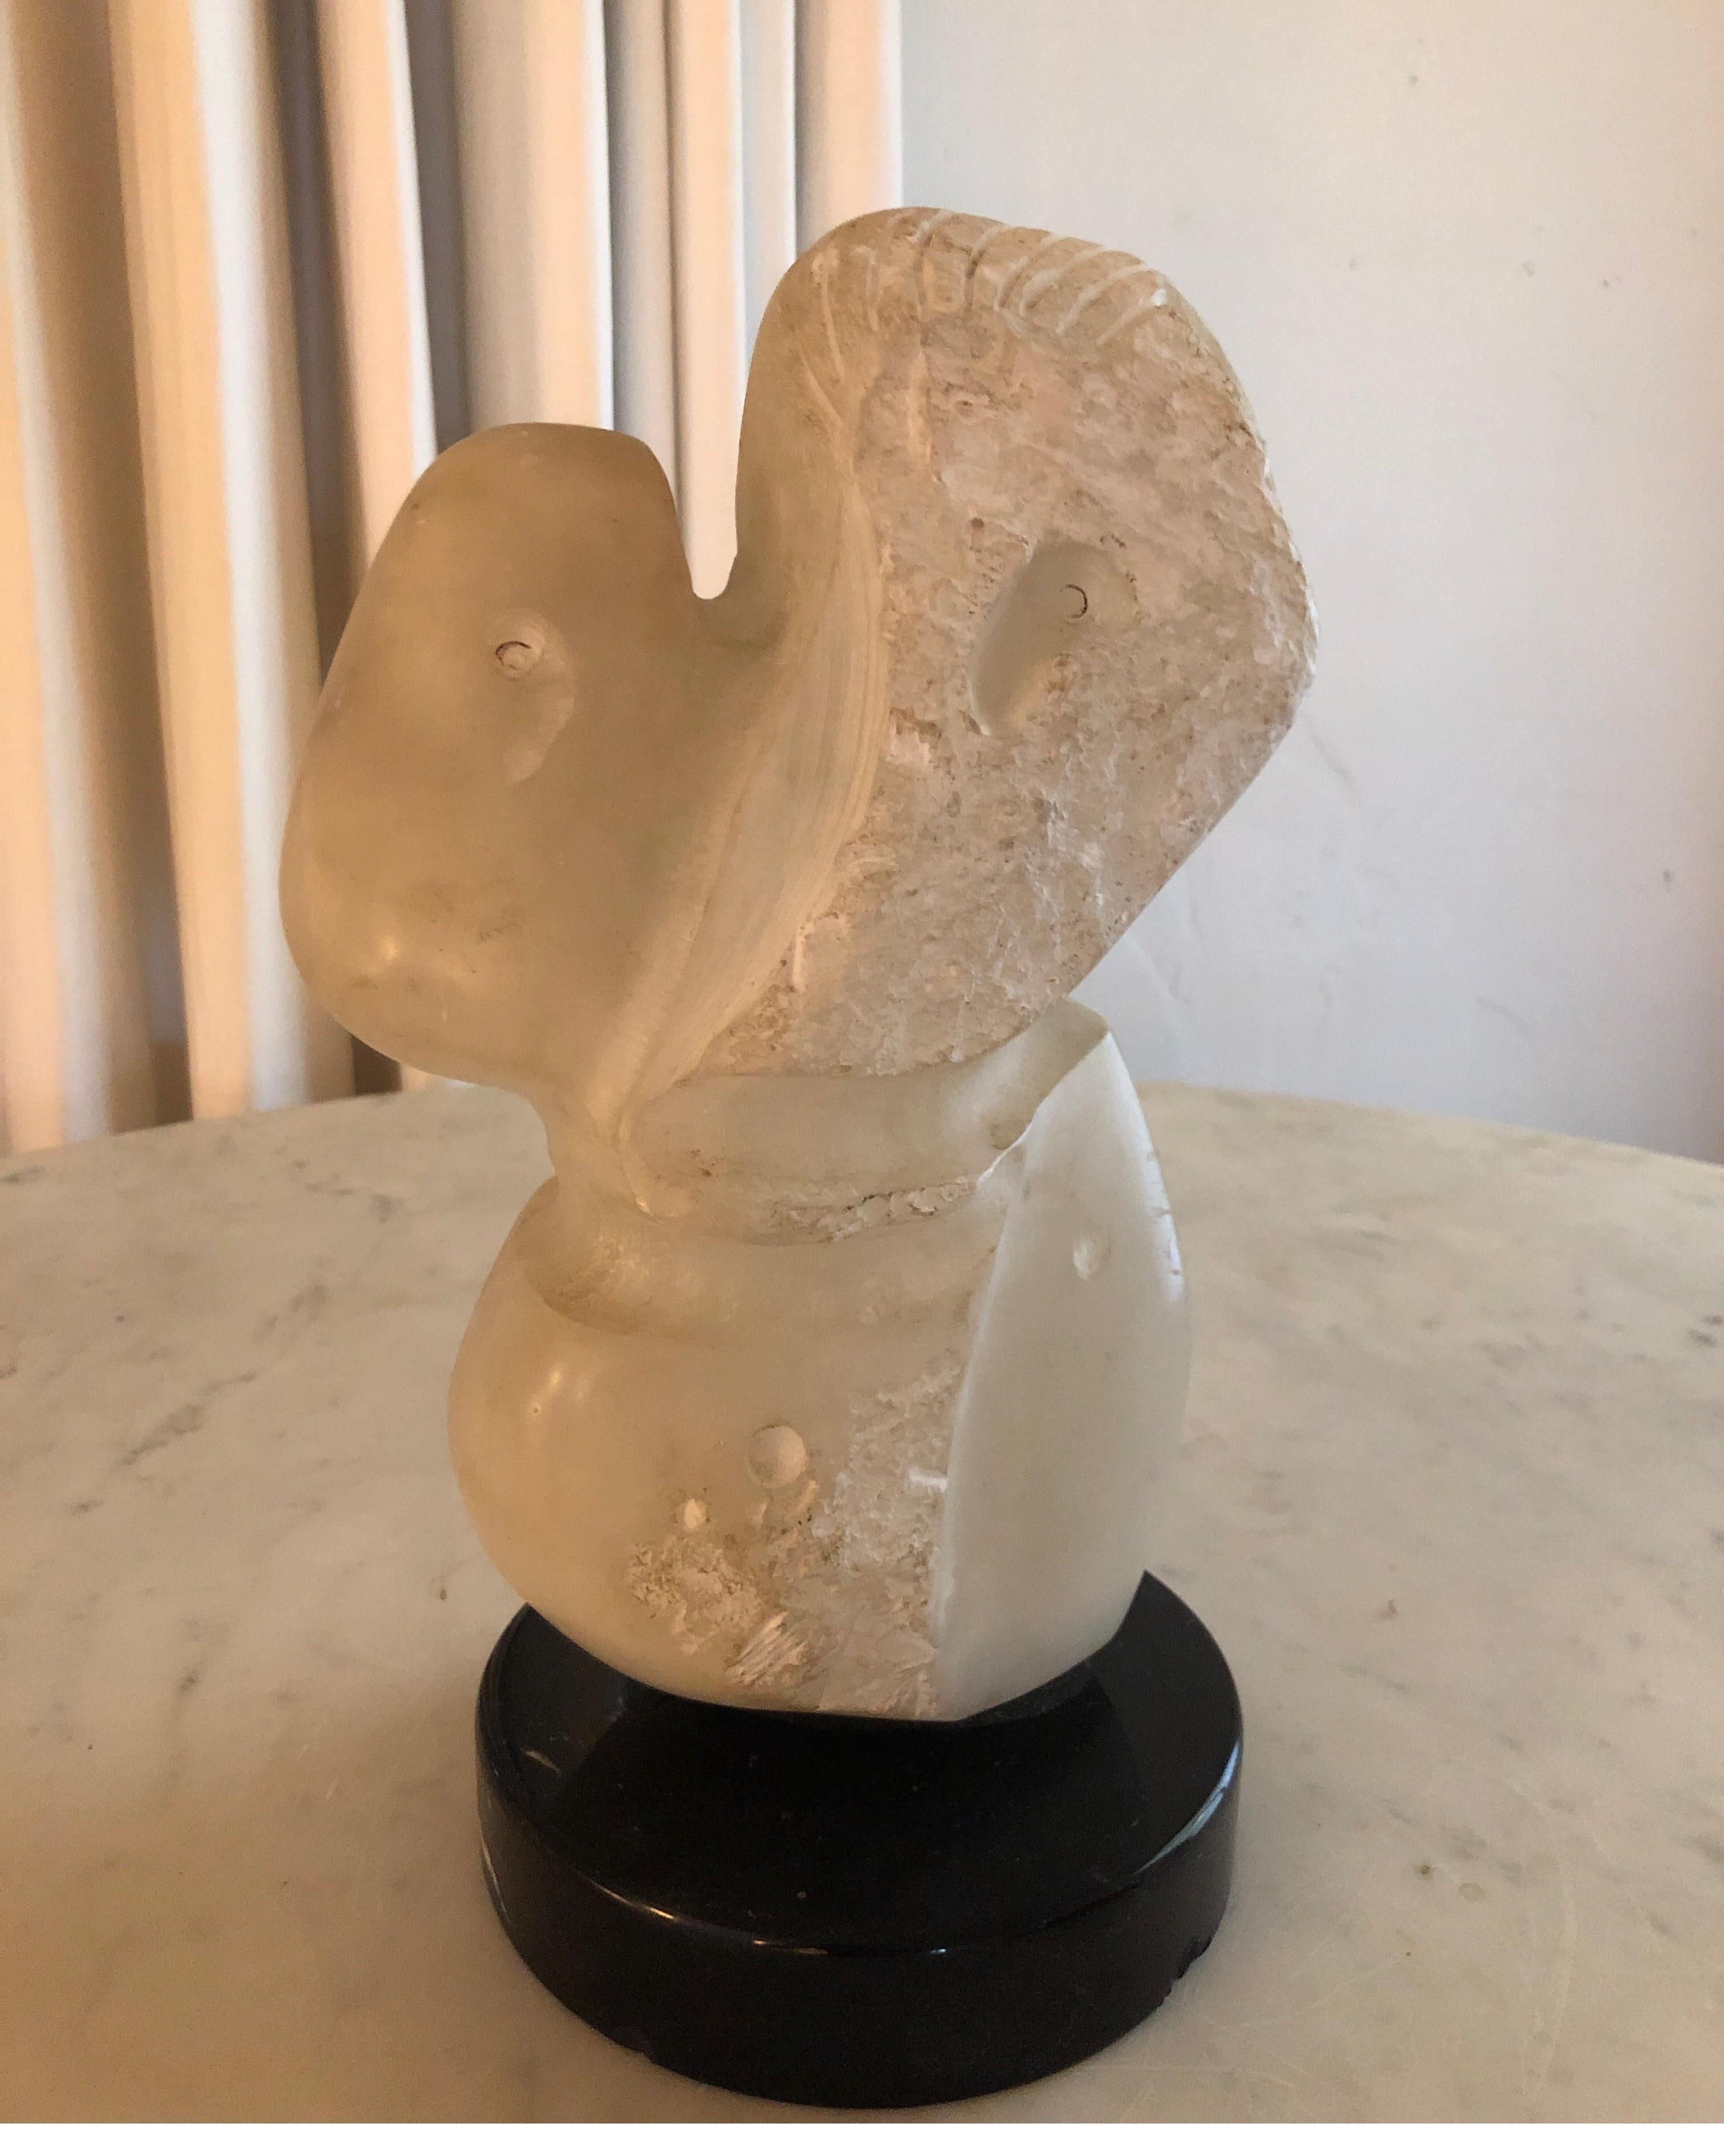 Unique Mid-Century Modern white marble stone sculpture mounted on black marble base.
Signed by American artist Yehuda 